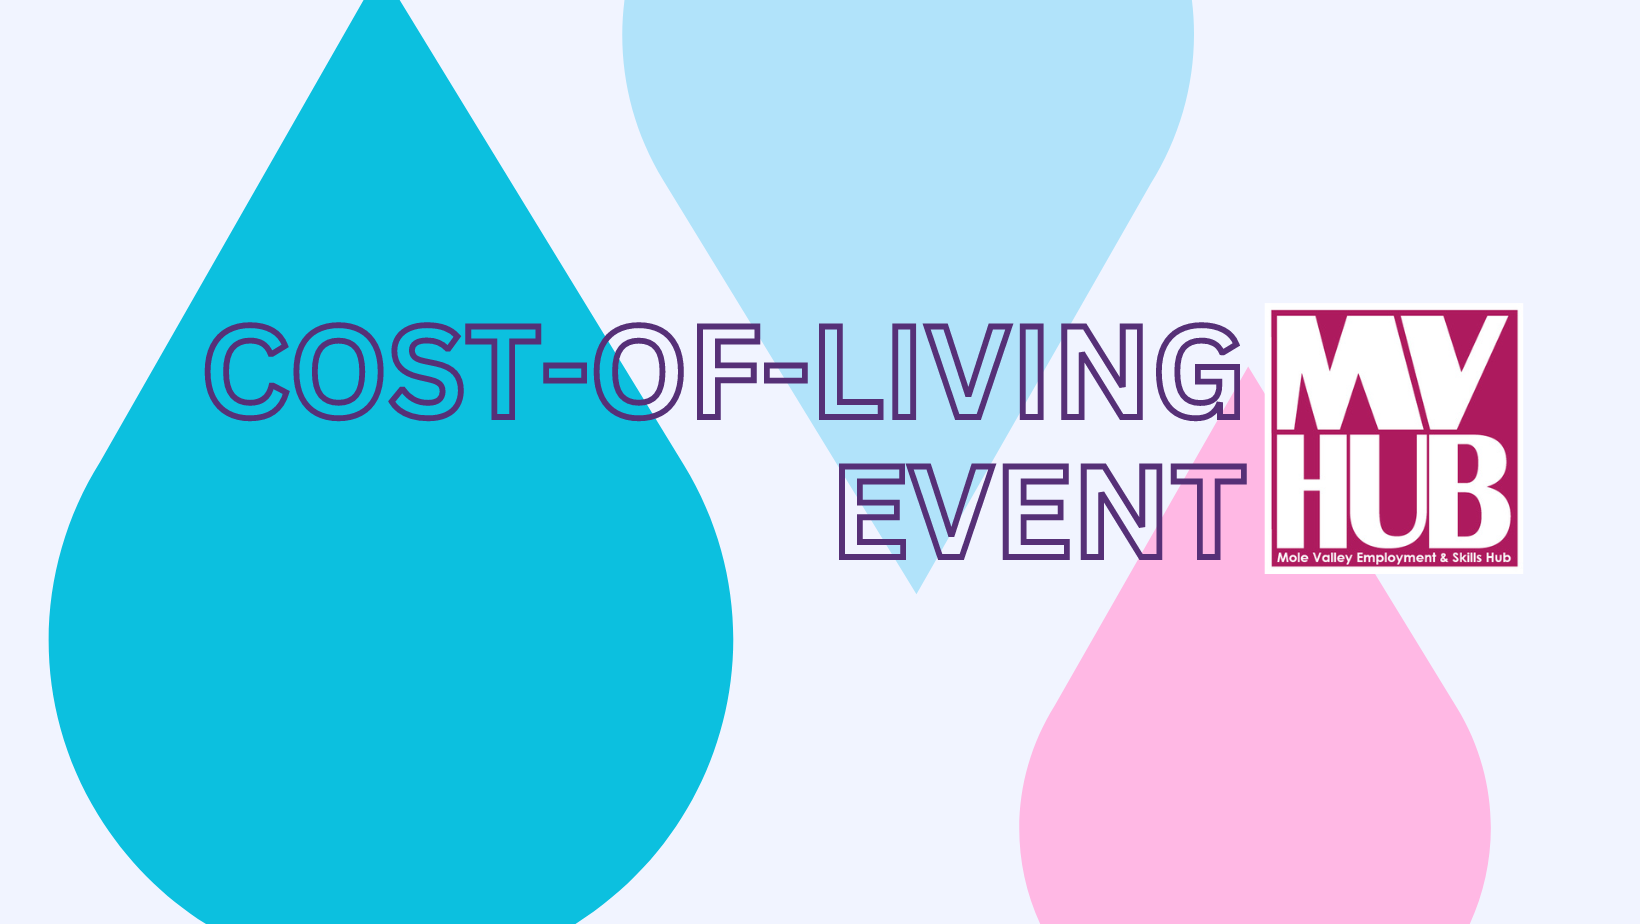 Cost of Living Event - Mole Valley Employment & Skills Hub